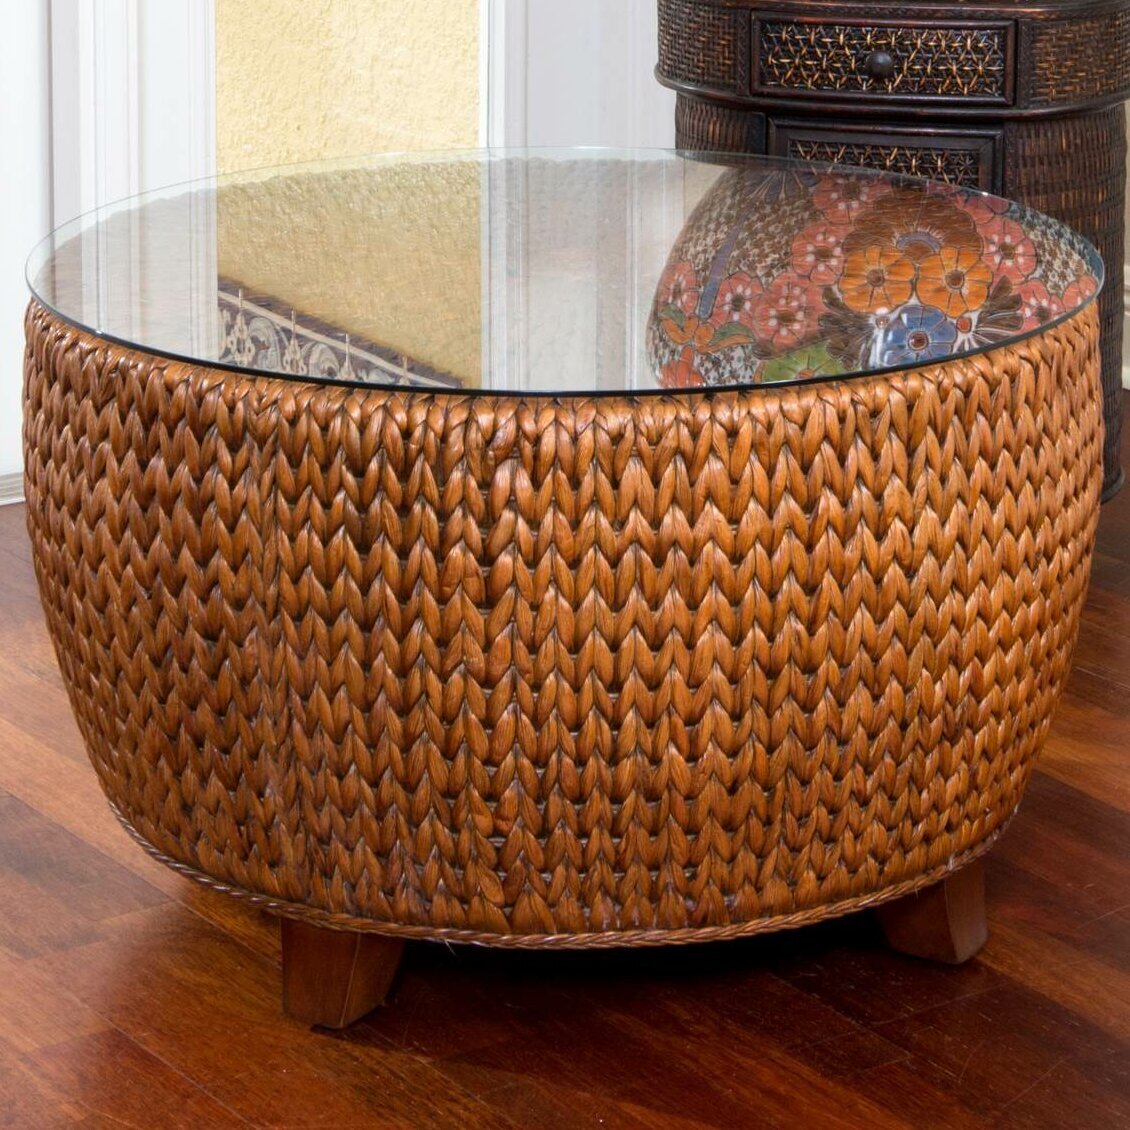 Small Round Wicker Coffee Table with Glass Top